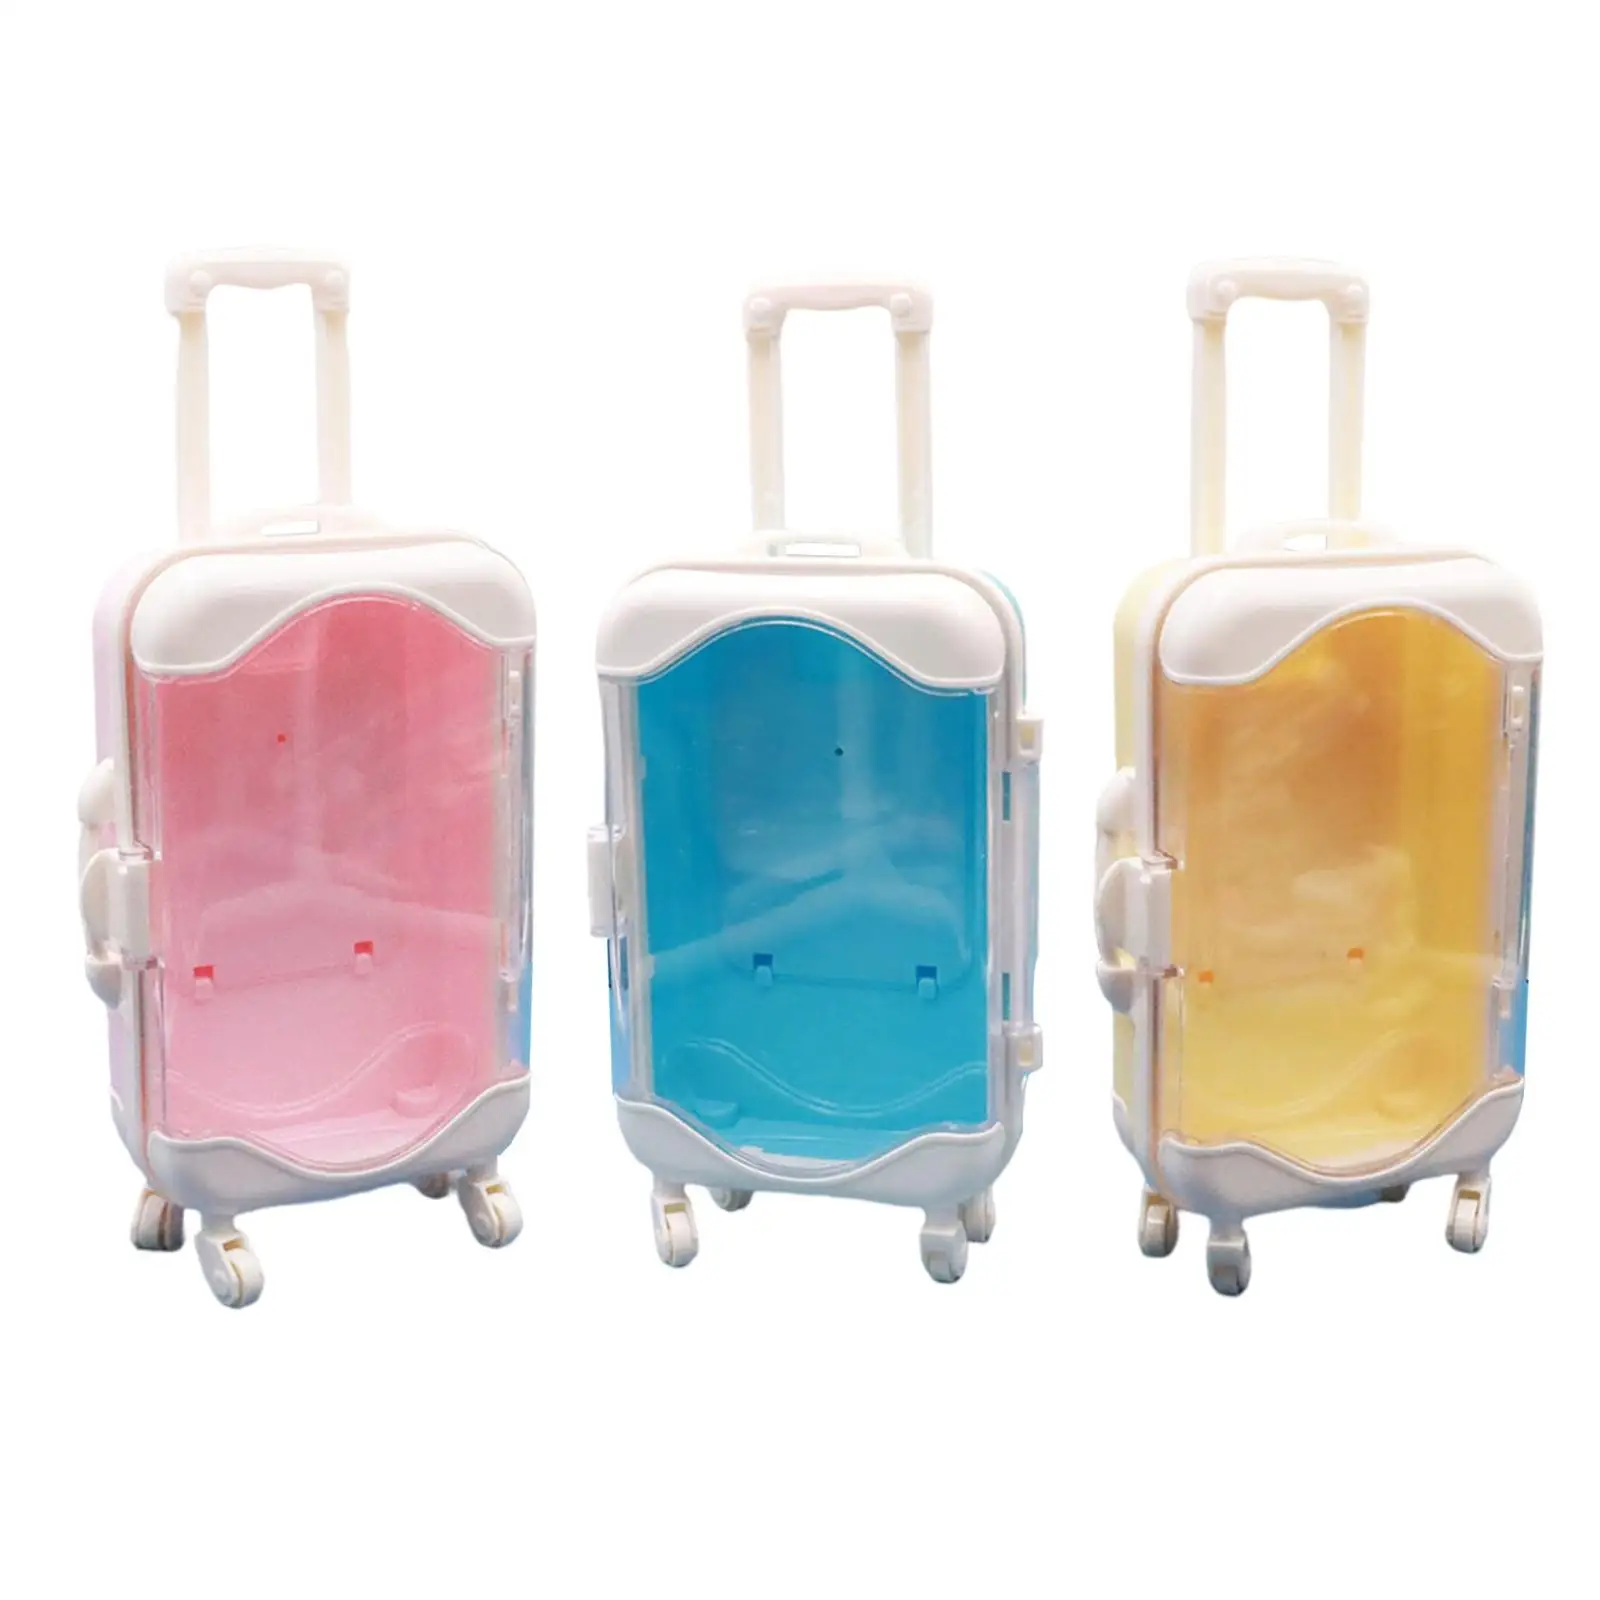 1/12 Mini Trolley Luggage,Doll House Scenery Pretend Play Toy,Miniature Trunk